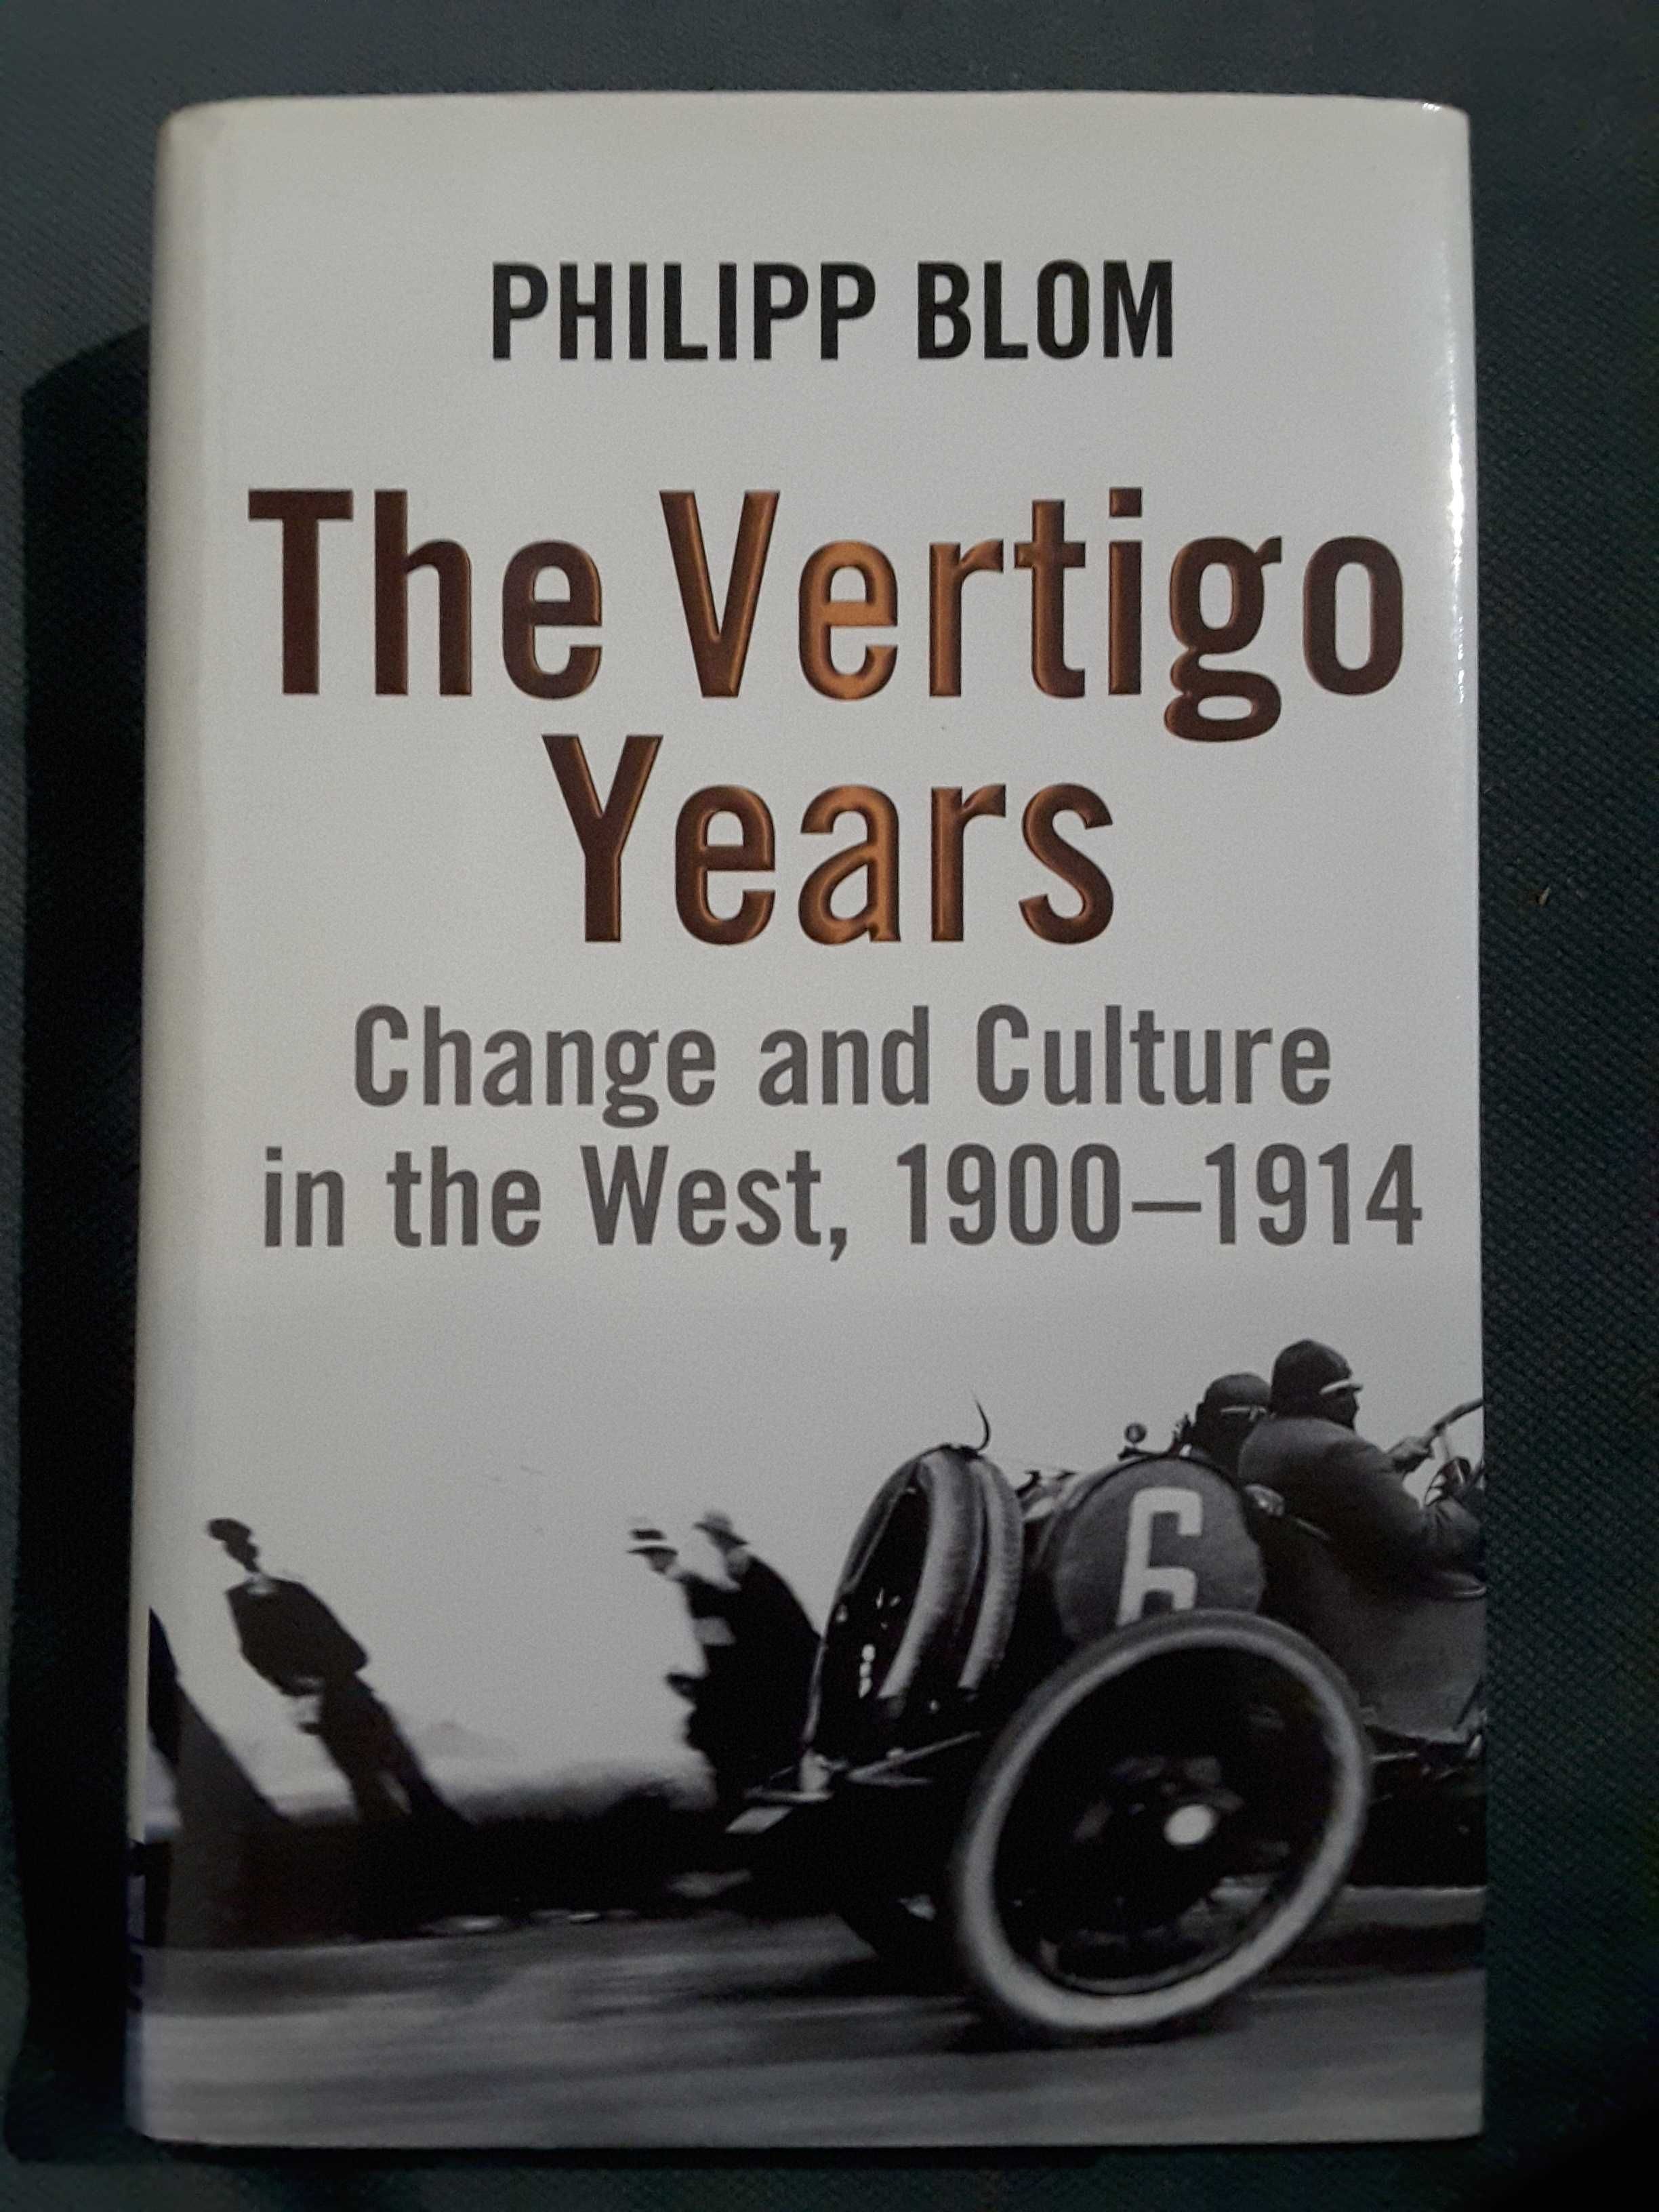 Change in the West 1900/1914 / Hobsbawm – A Era do Capital